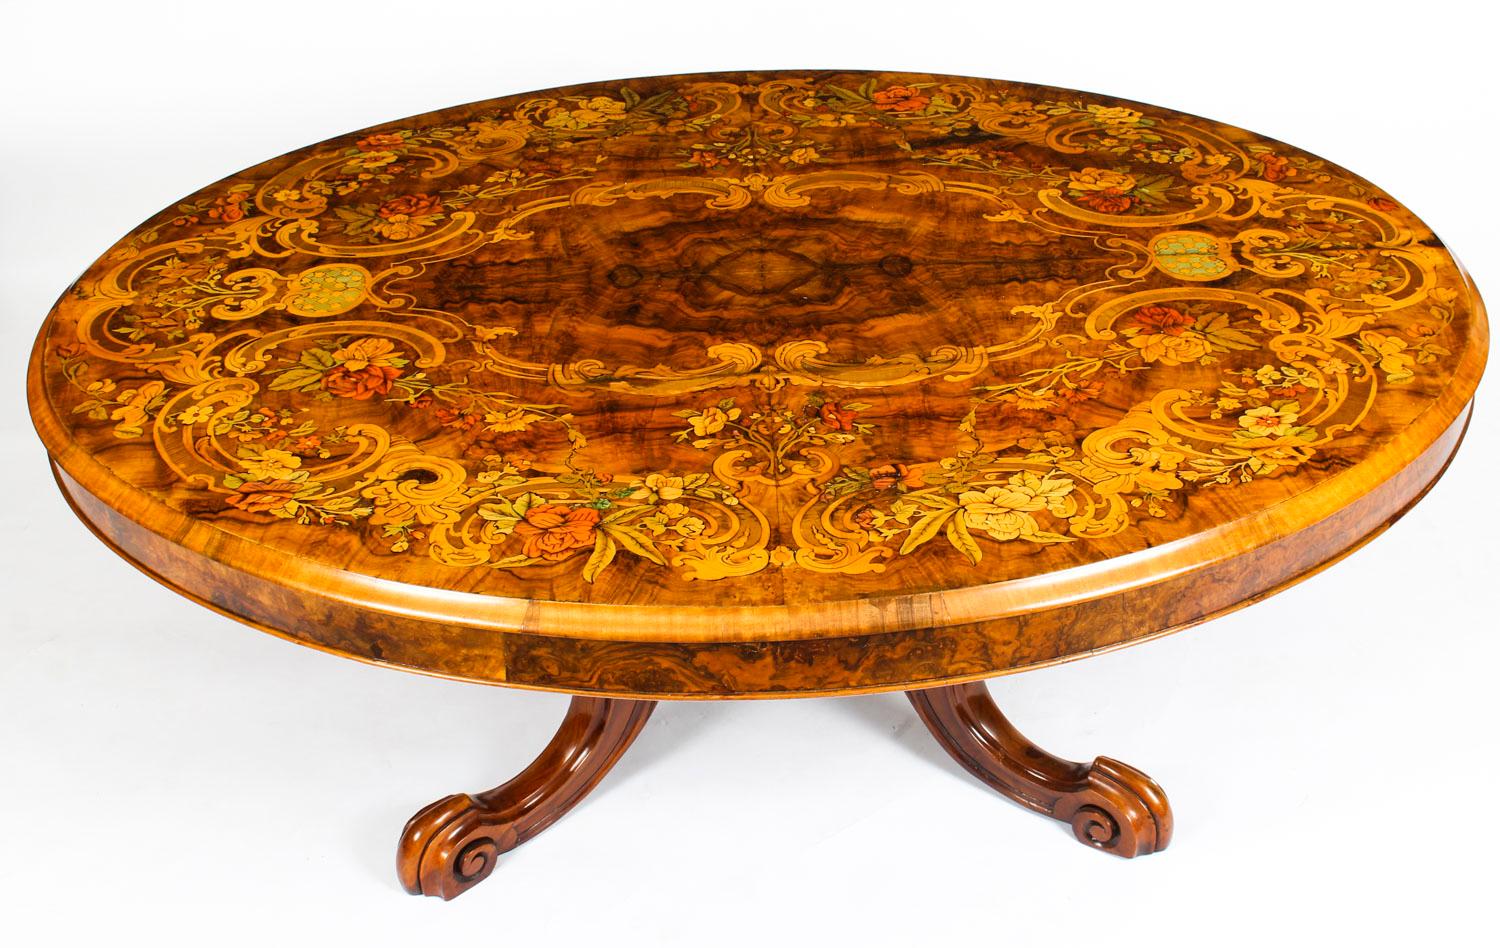 This is a superb Victorian burr walnut and marquetry coffee table, circa 1860 in date.

The tabletop is oval in shape and features wonderful burr walnut with superb floral marquetry inlaid decoration. It is raised on a base that is hand carved